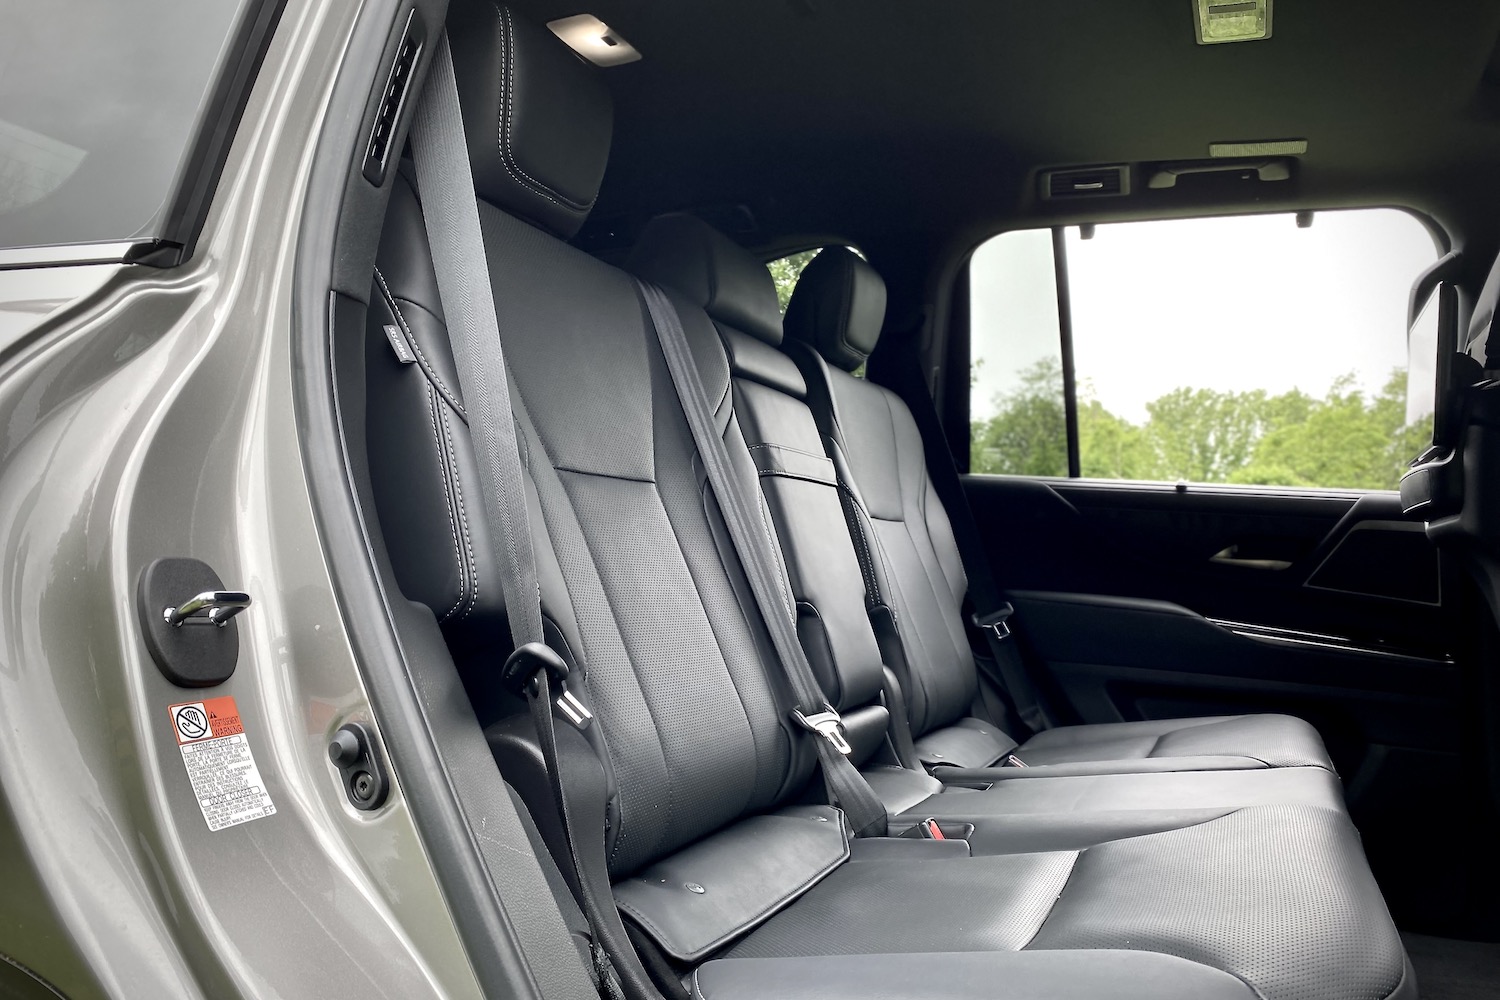 Second-row seats in the 2022 Lexus LX 600 from the passenger's side outside the SUV.